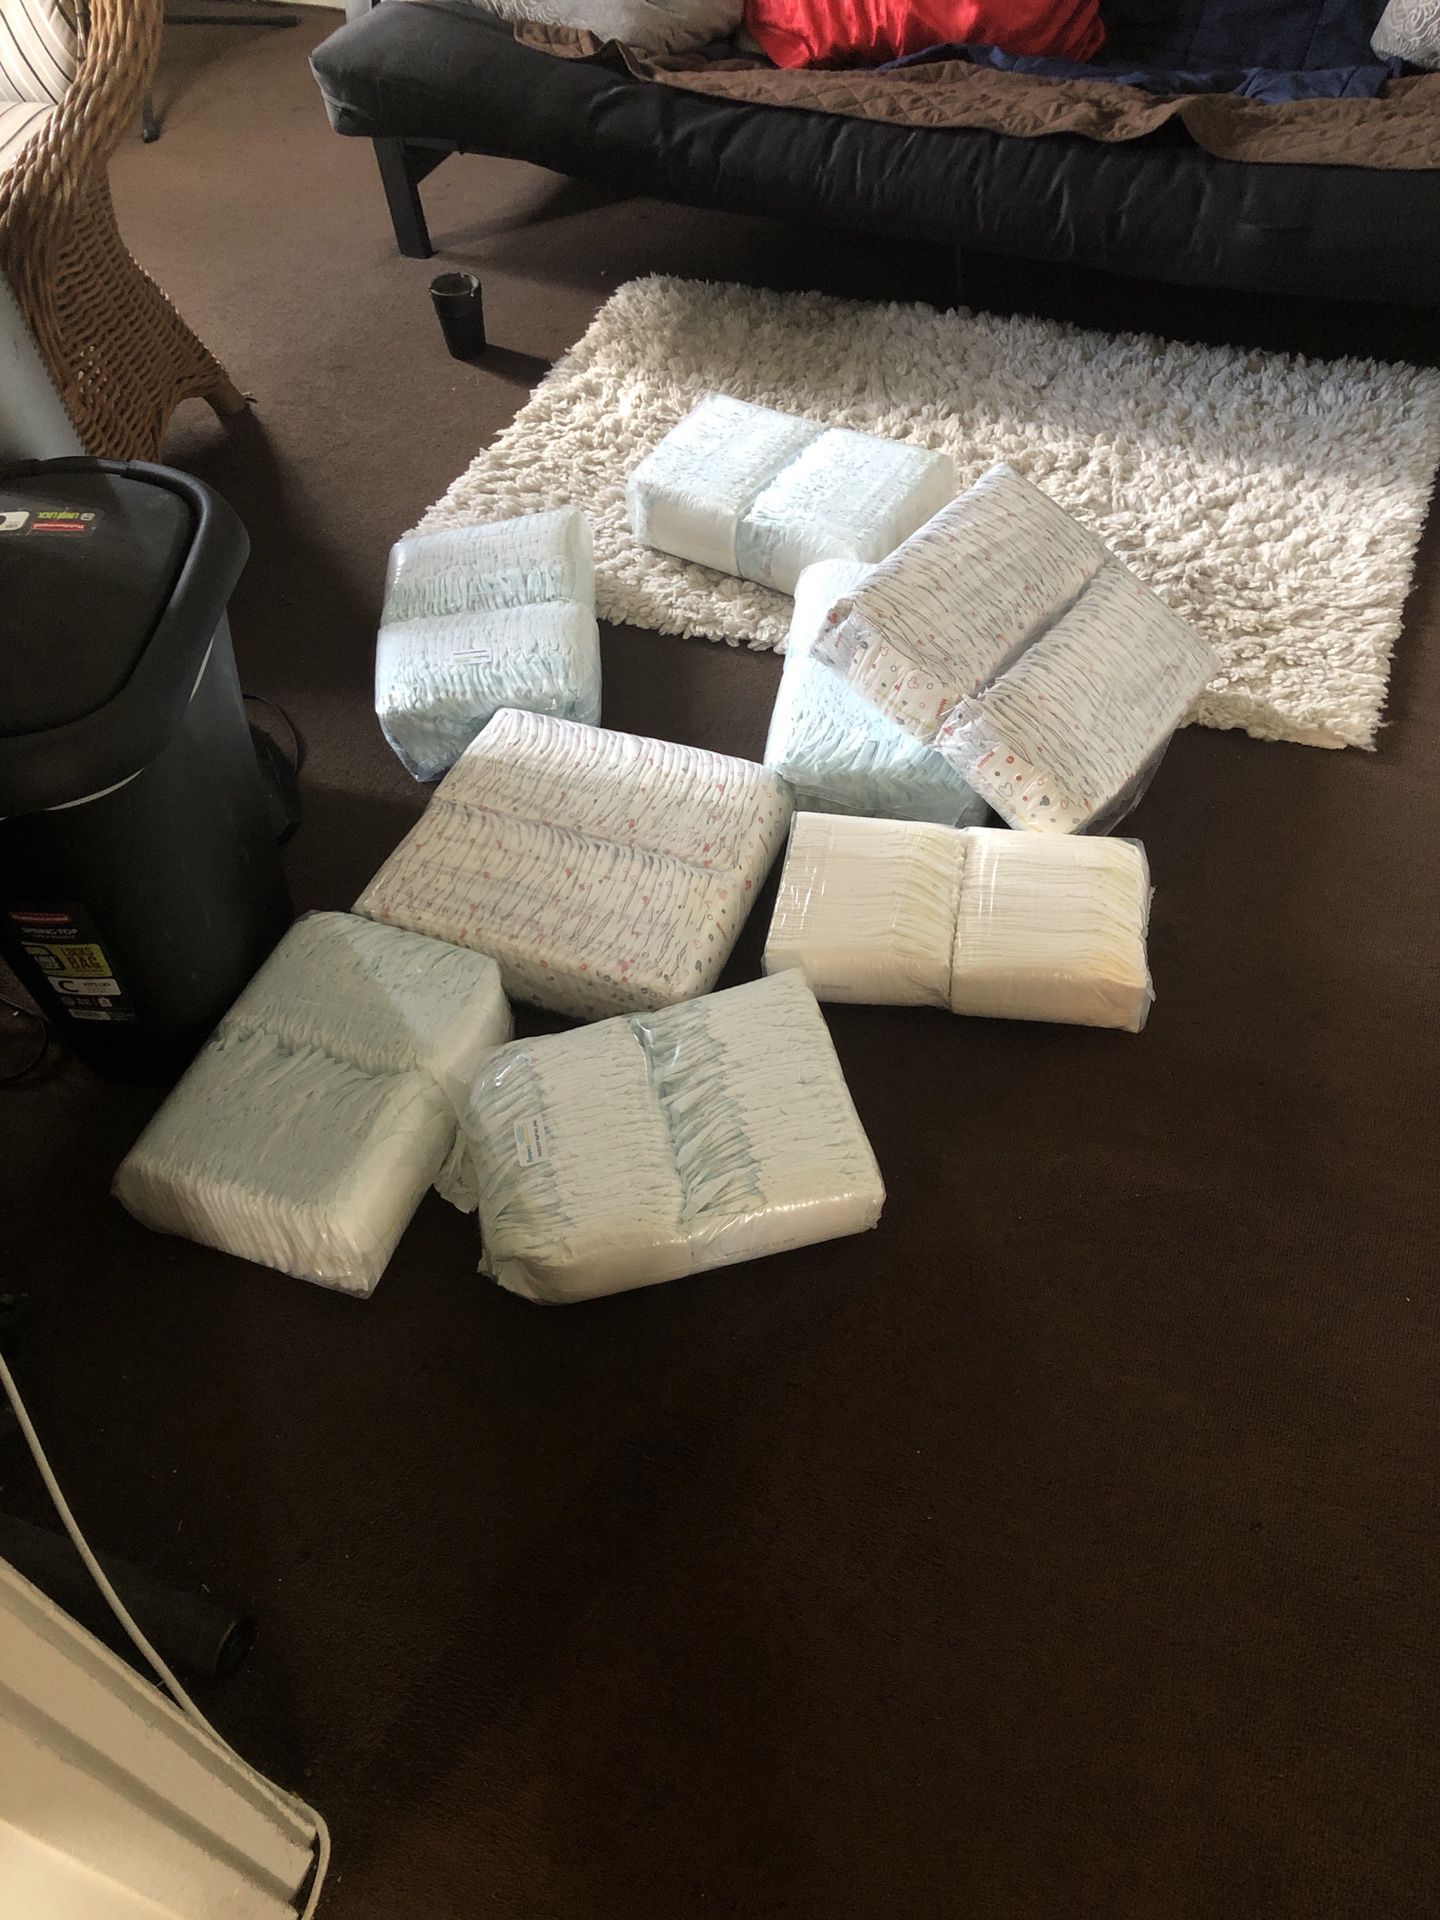 8 bags size 1 diapers